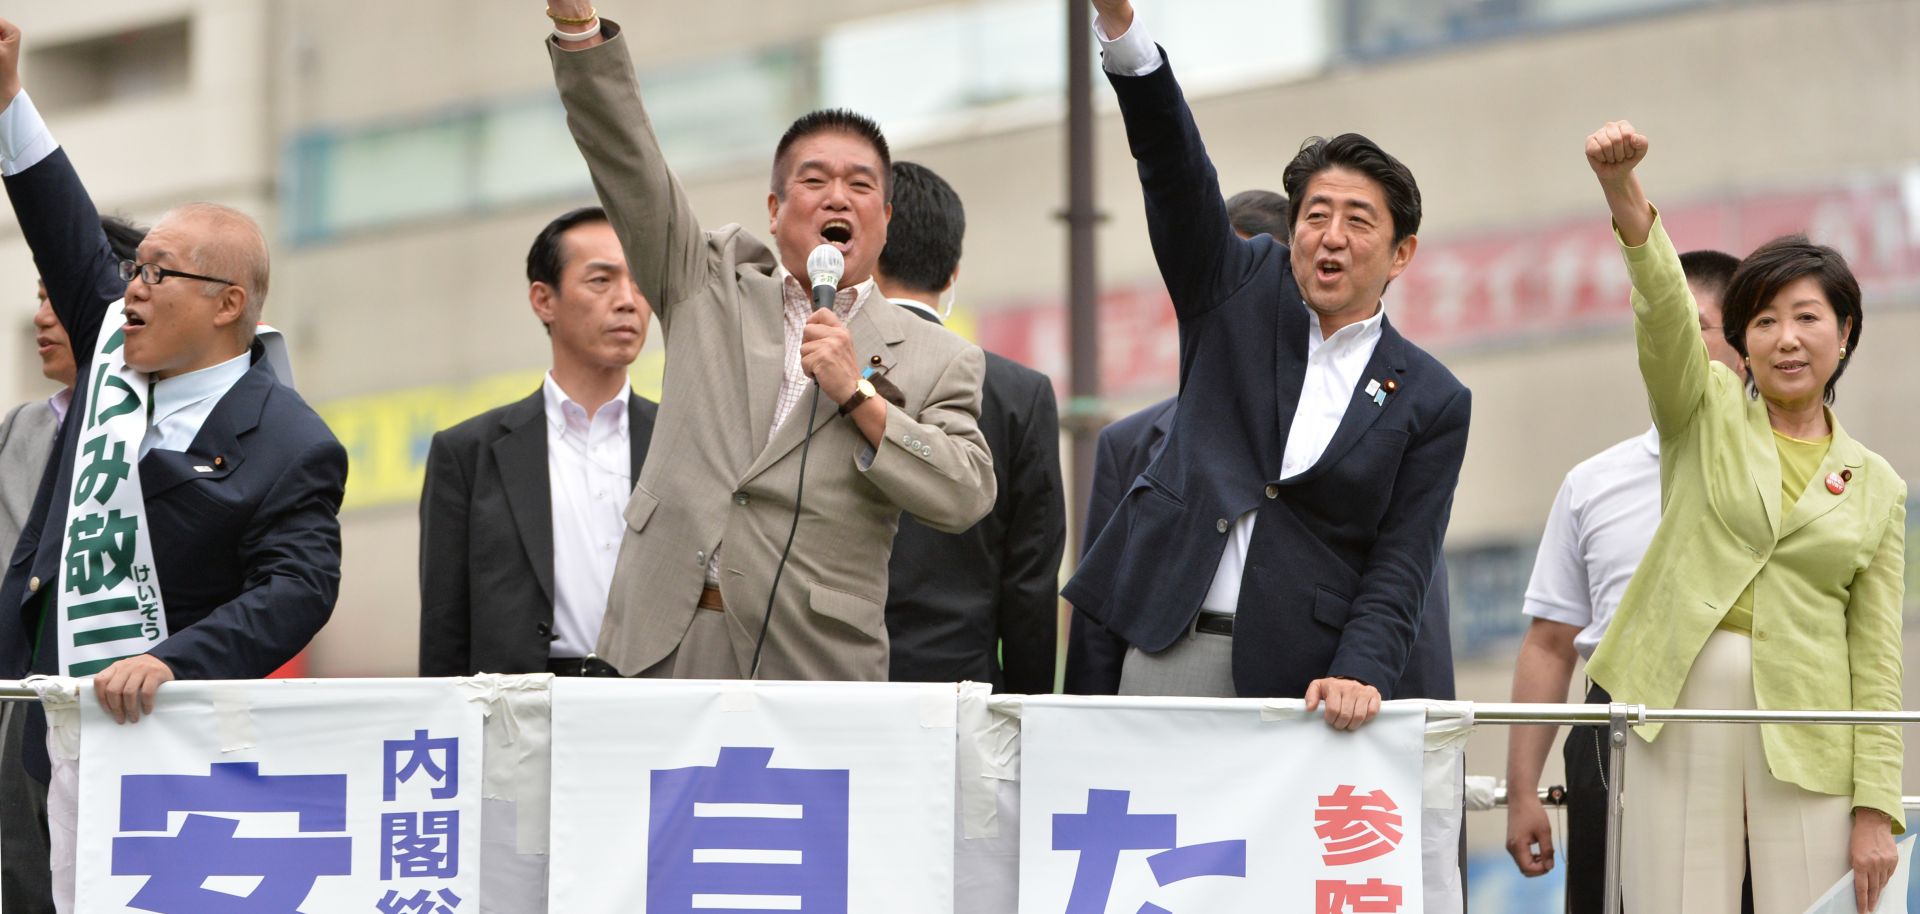 Japan's Elections Set the Stage for Reforms